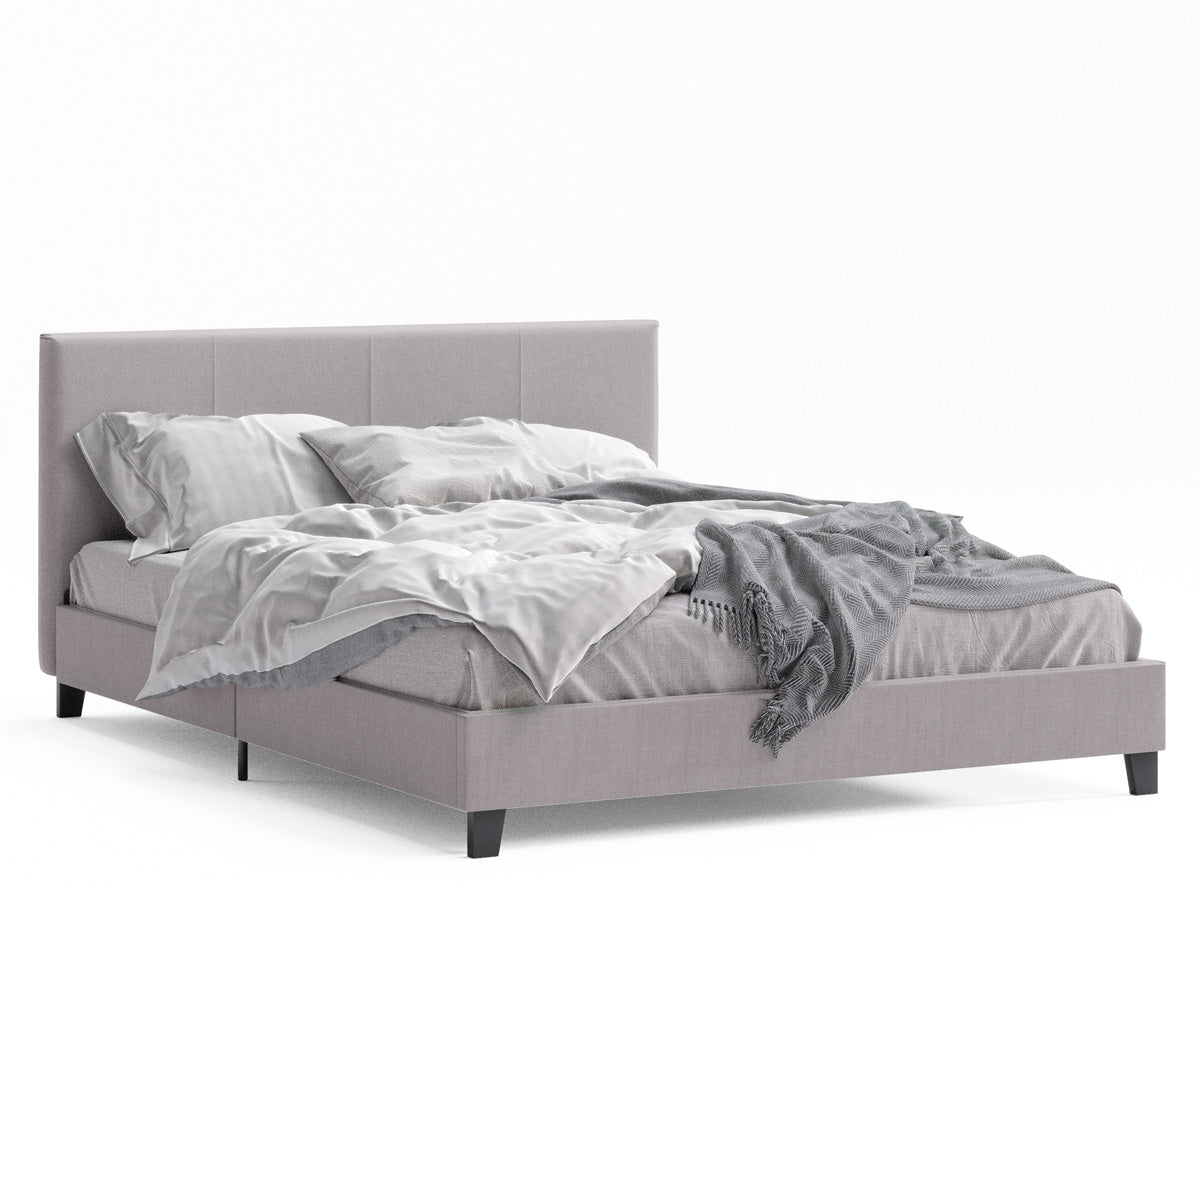 Hans Fabric Bed Frame (Grey)